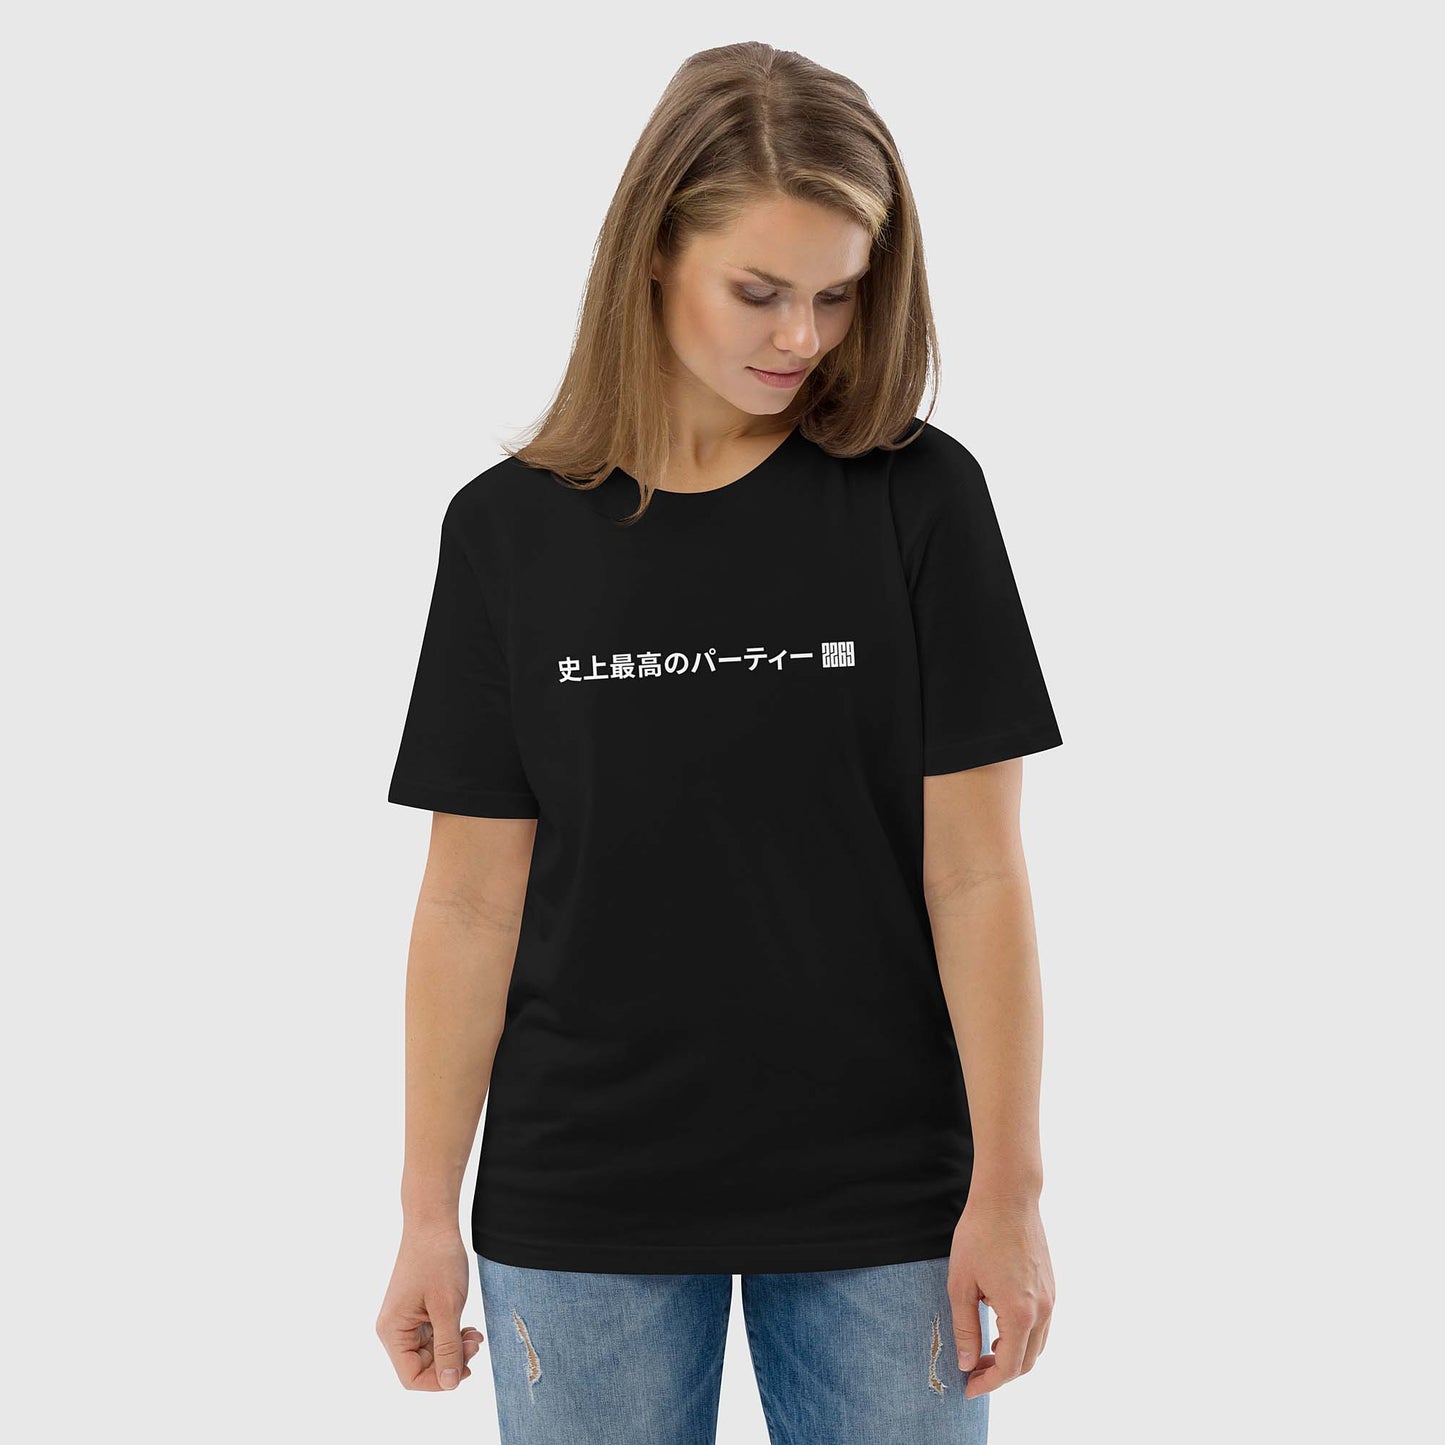 Unisex black organic cotton t-shirt with Japanese 2269 party message